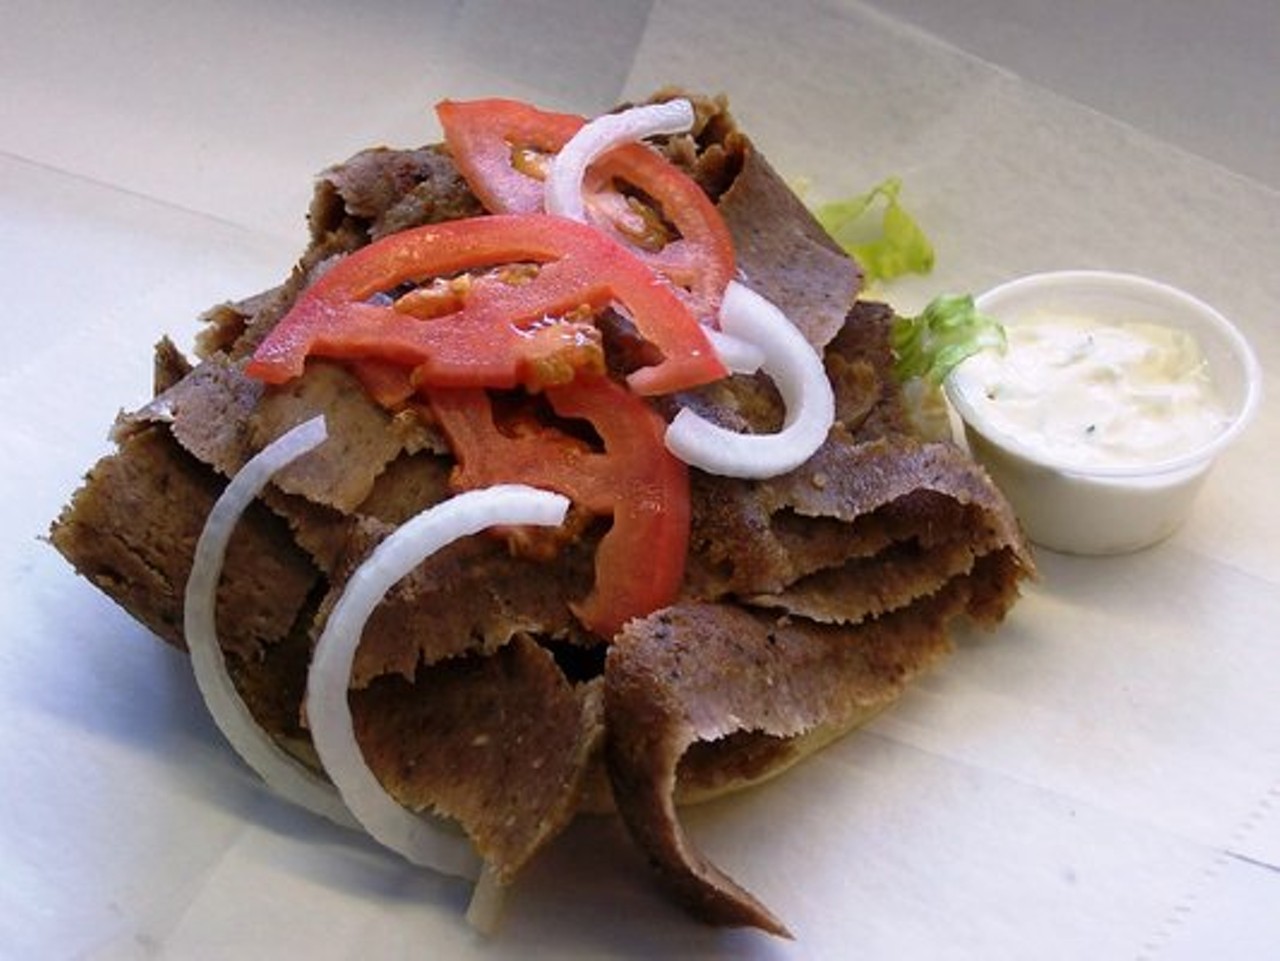 There is a reason why this area gyro joint is called Best Gyros. They have a giant gyro called the Cleveland Special Gyro. Filled with over a pound of meat, the pita is then packed with onions, lettuce, tzatziki  sauce, and- wait for it- perogies. Best Gyros is located at 2245 Lee Rd, 
Cleveland Heights.